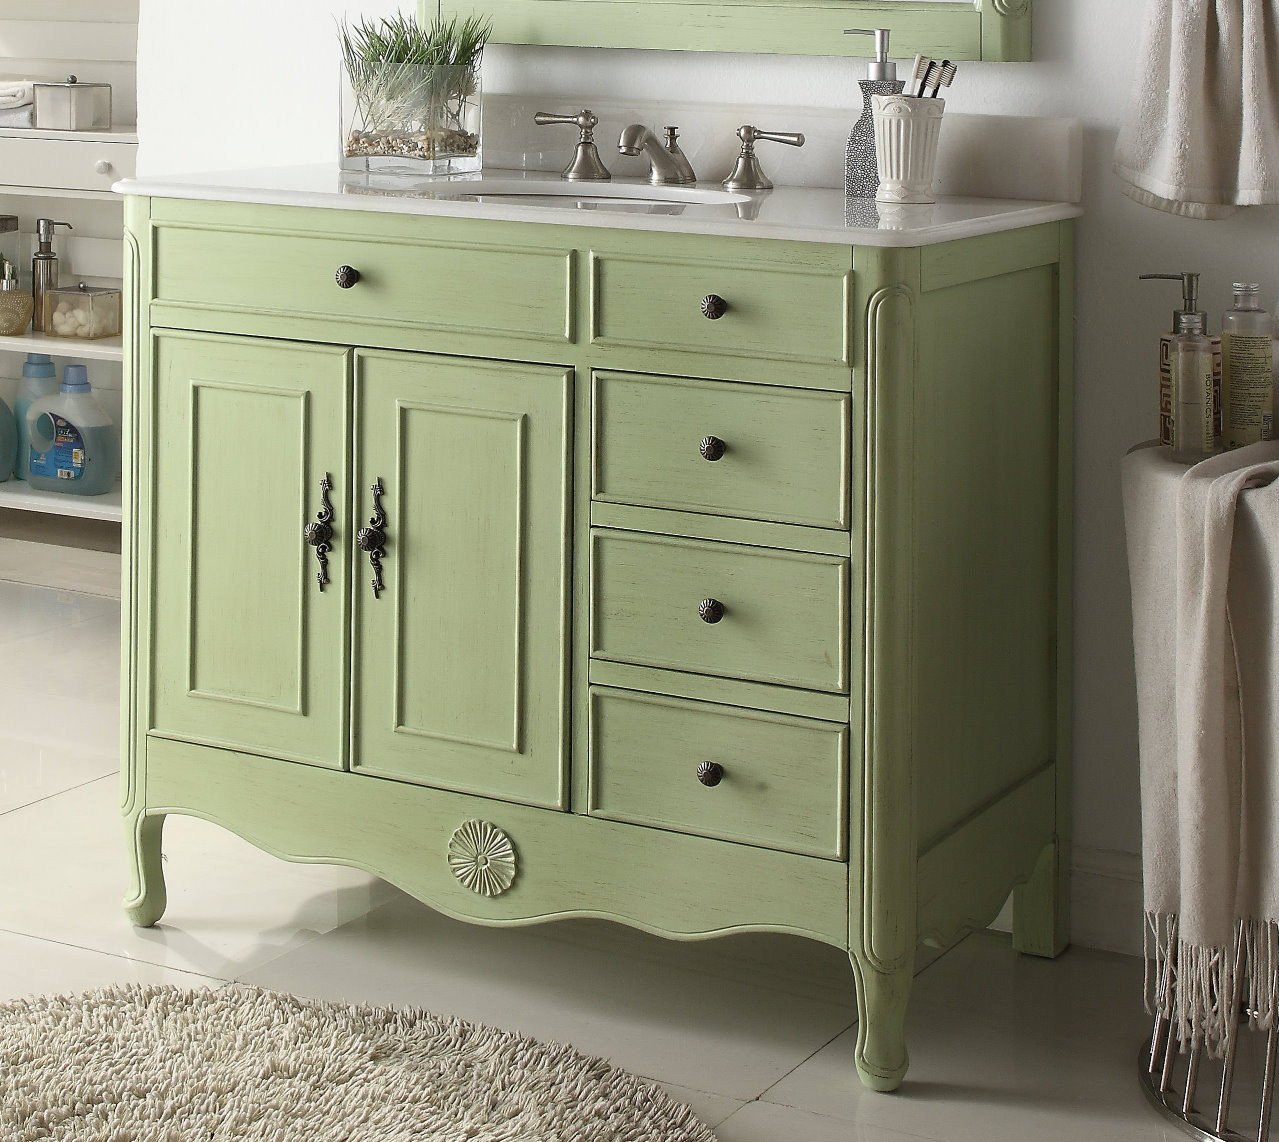 Green Bathroom Vanity
 38 inch Bathroom Vanity with 3 Drawers on The Right